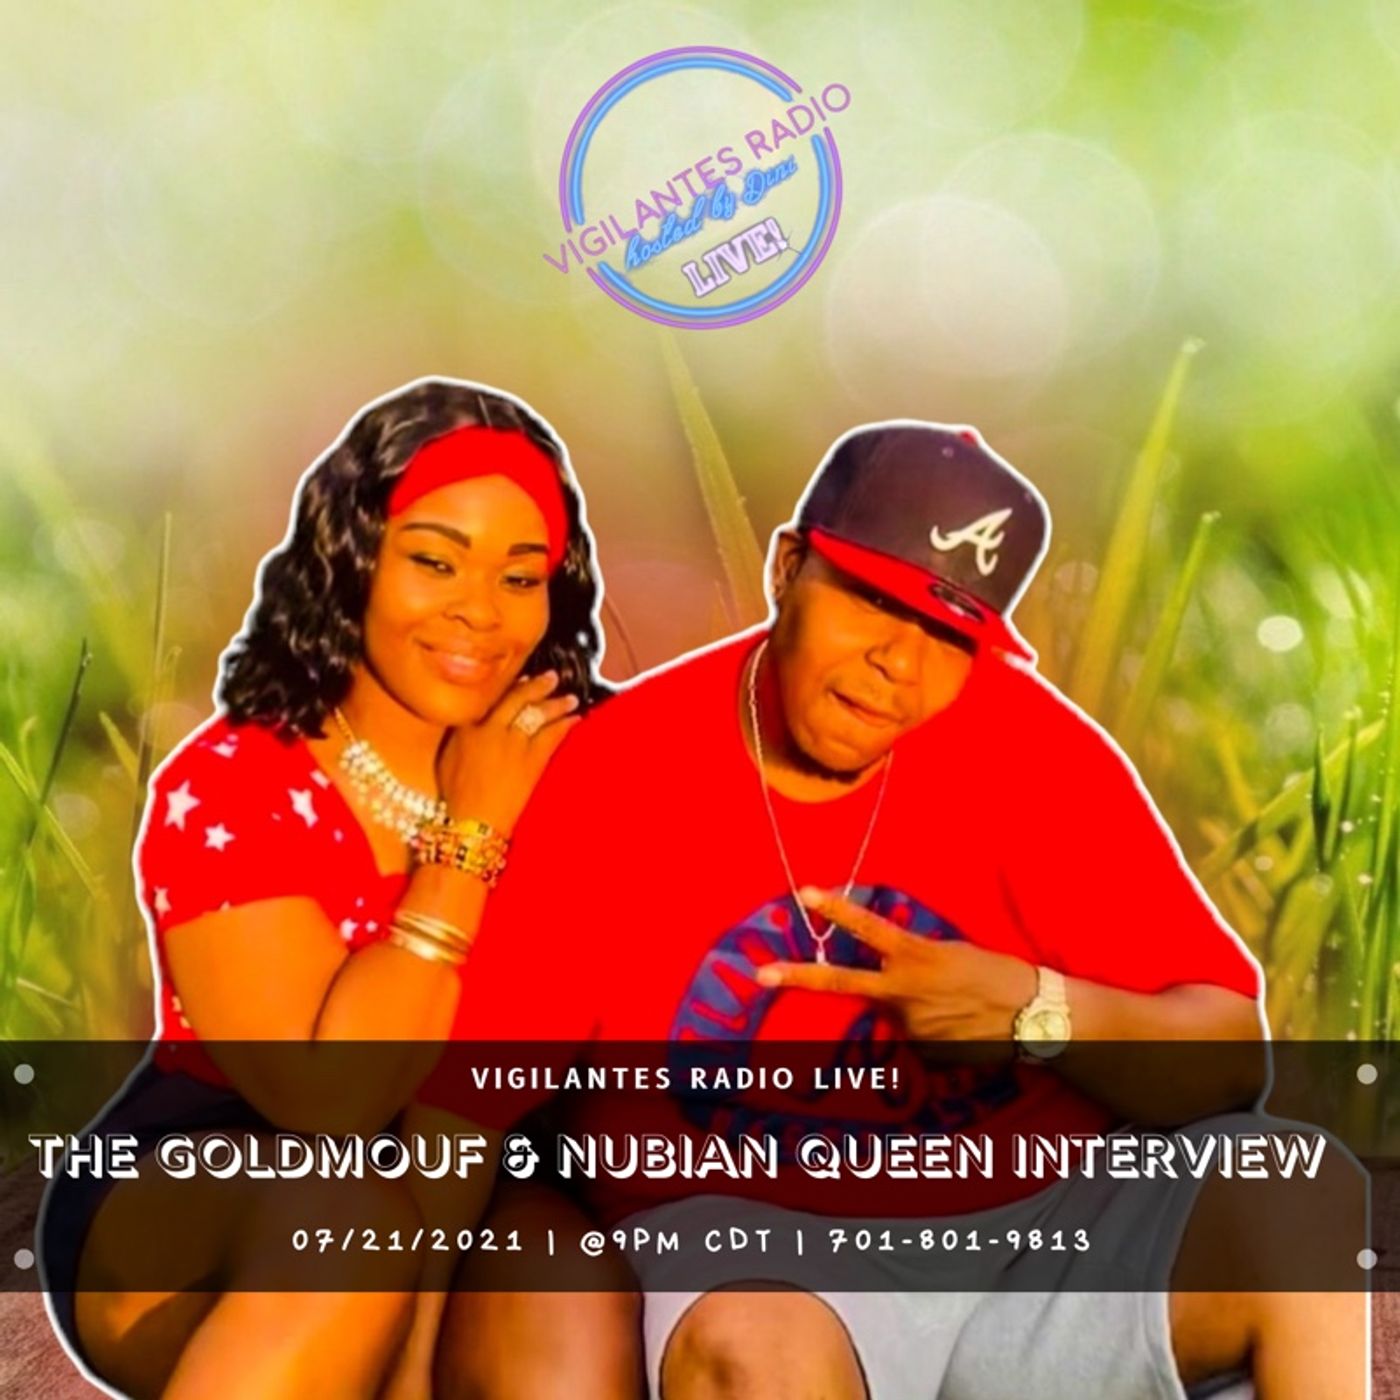 The Goldmouf x Nubian Queen Interview. Image